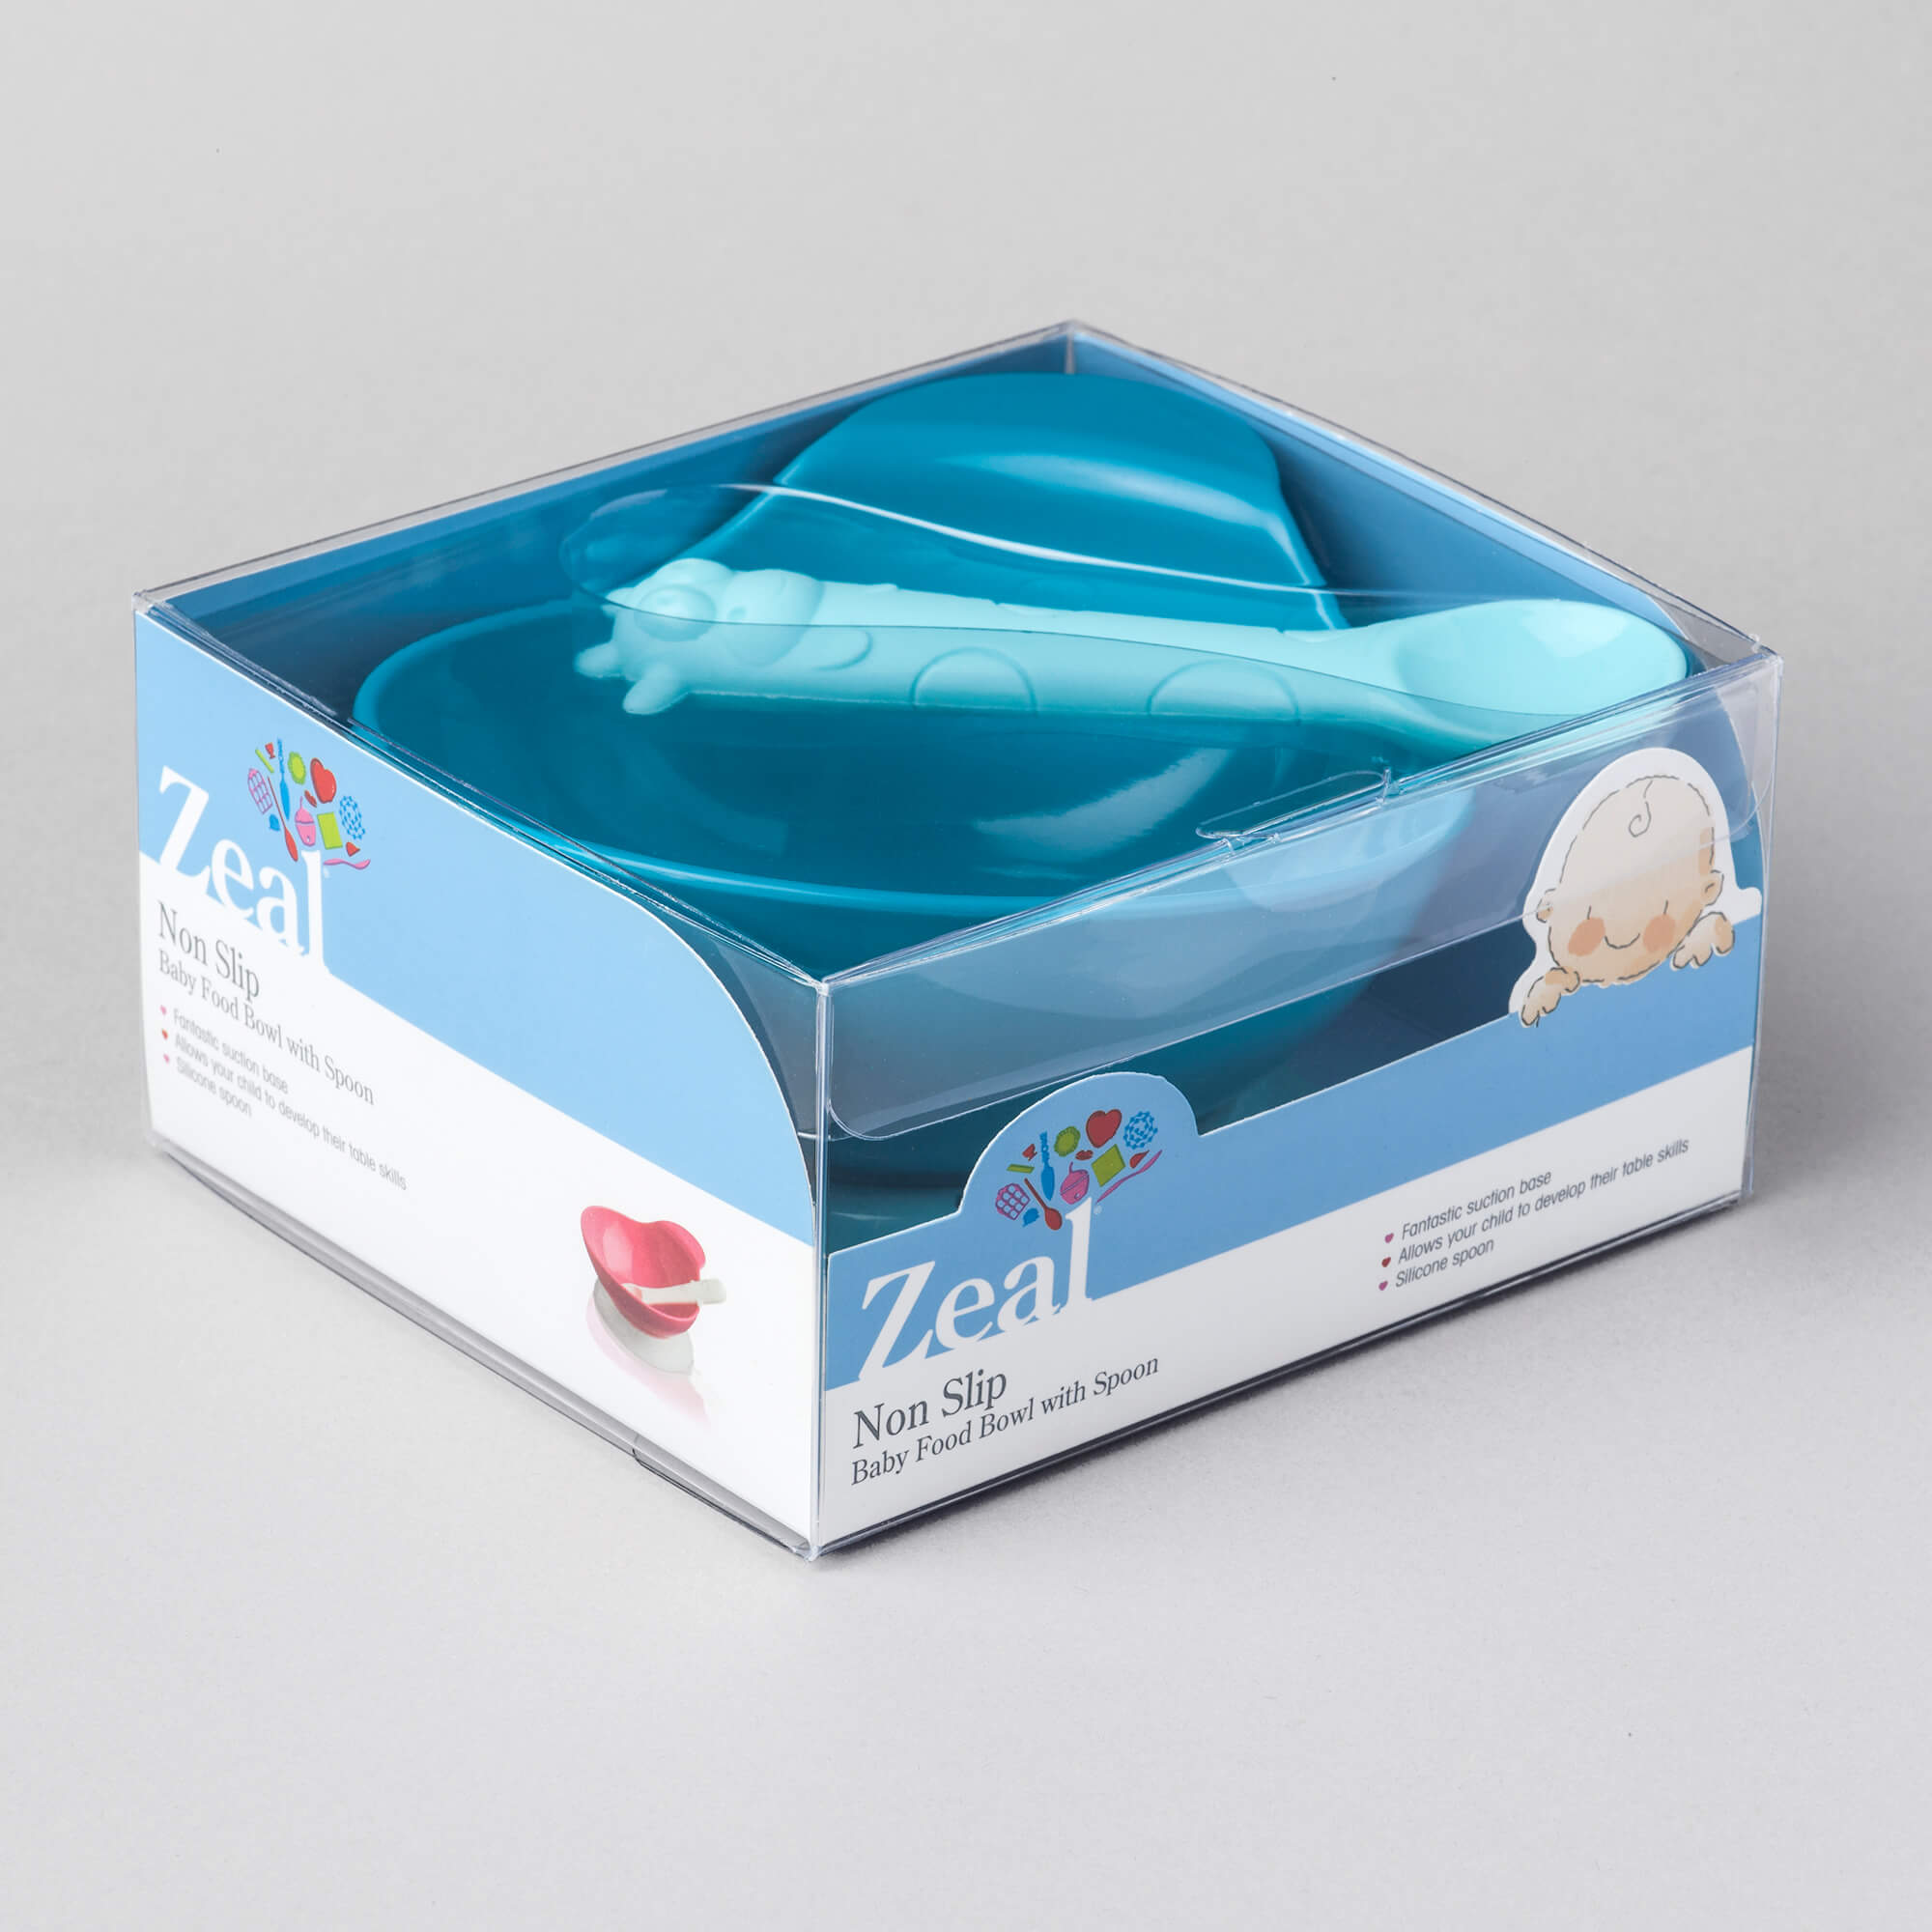 Zeal Silicone Baby Bowl and Spoon Set packaging